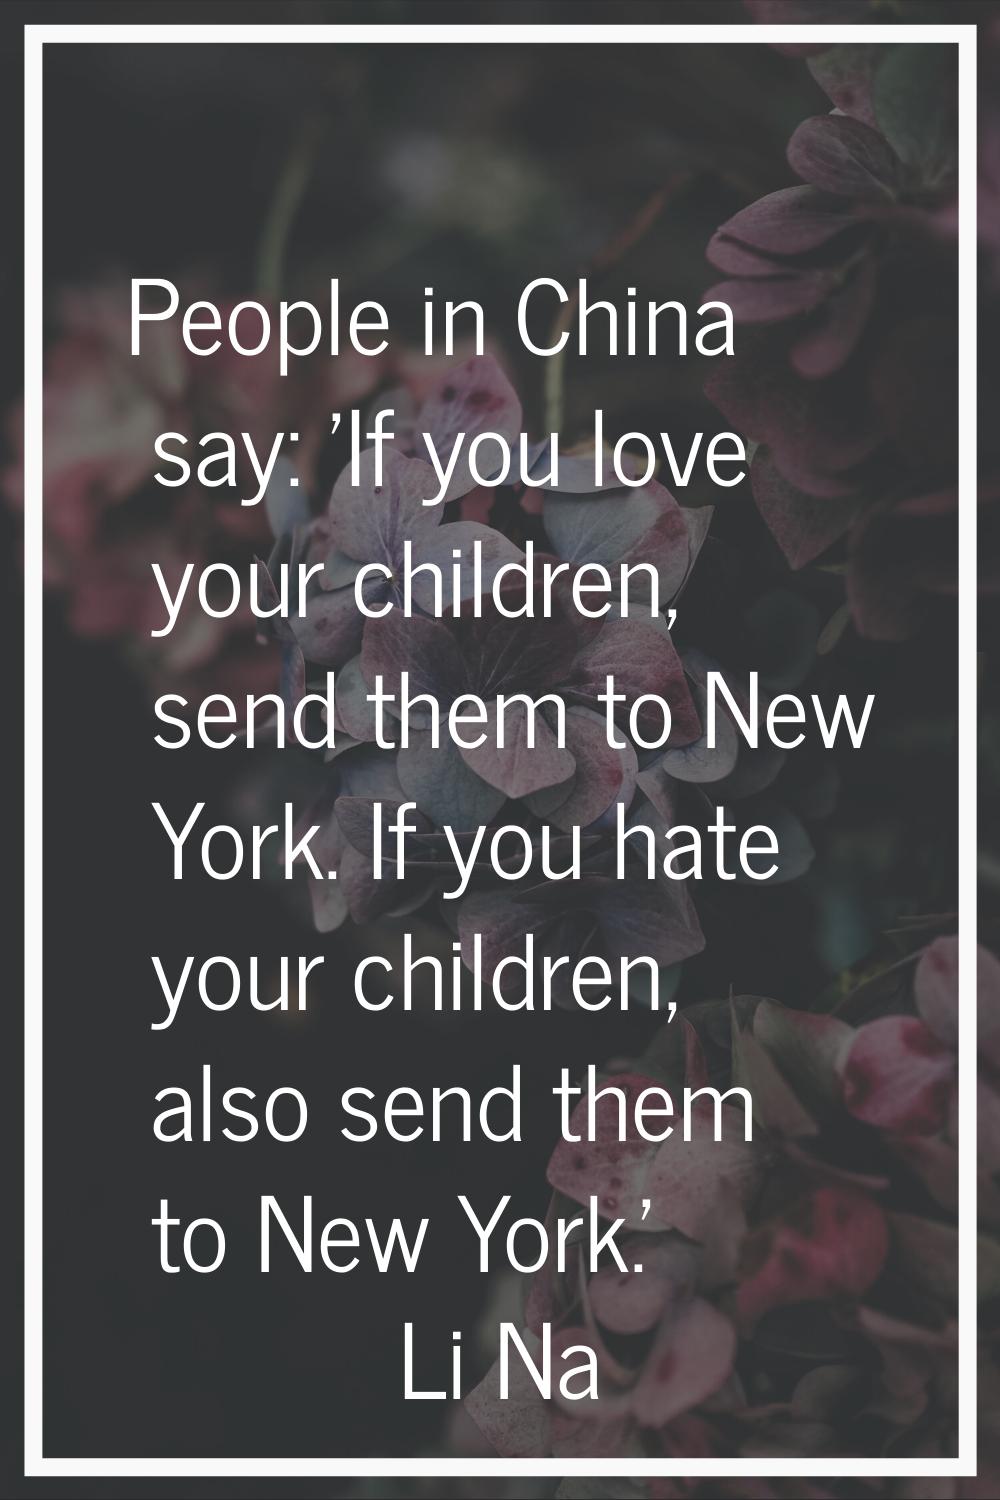 People in China say: 'If you love your children, send them to New York. If you hate your children, 